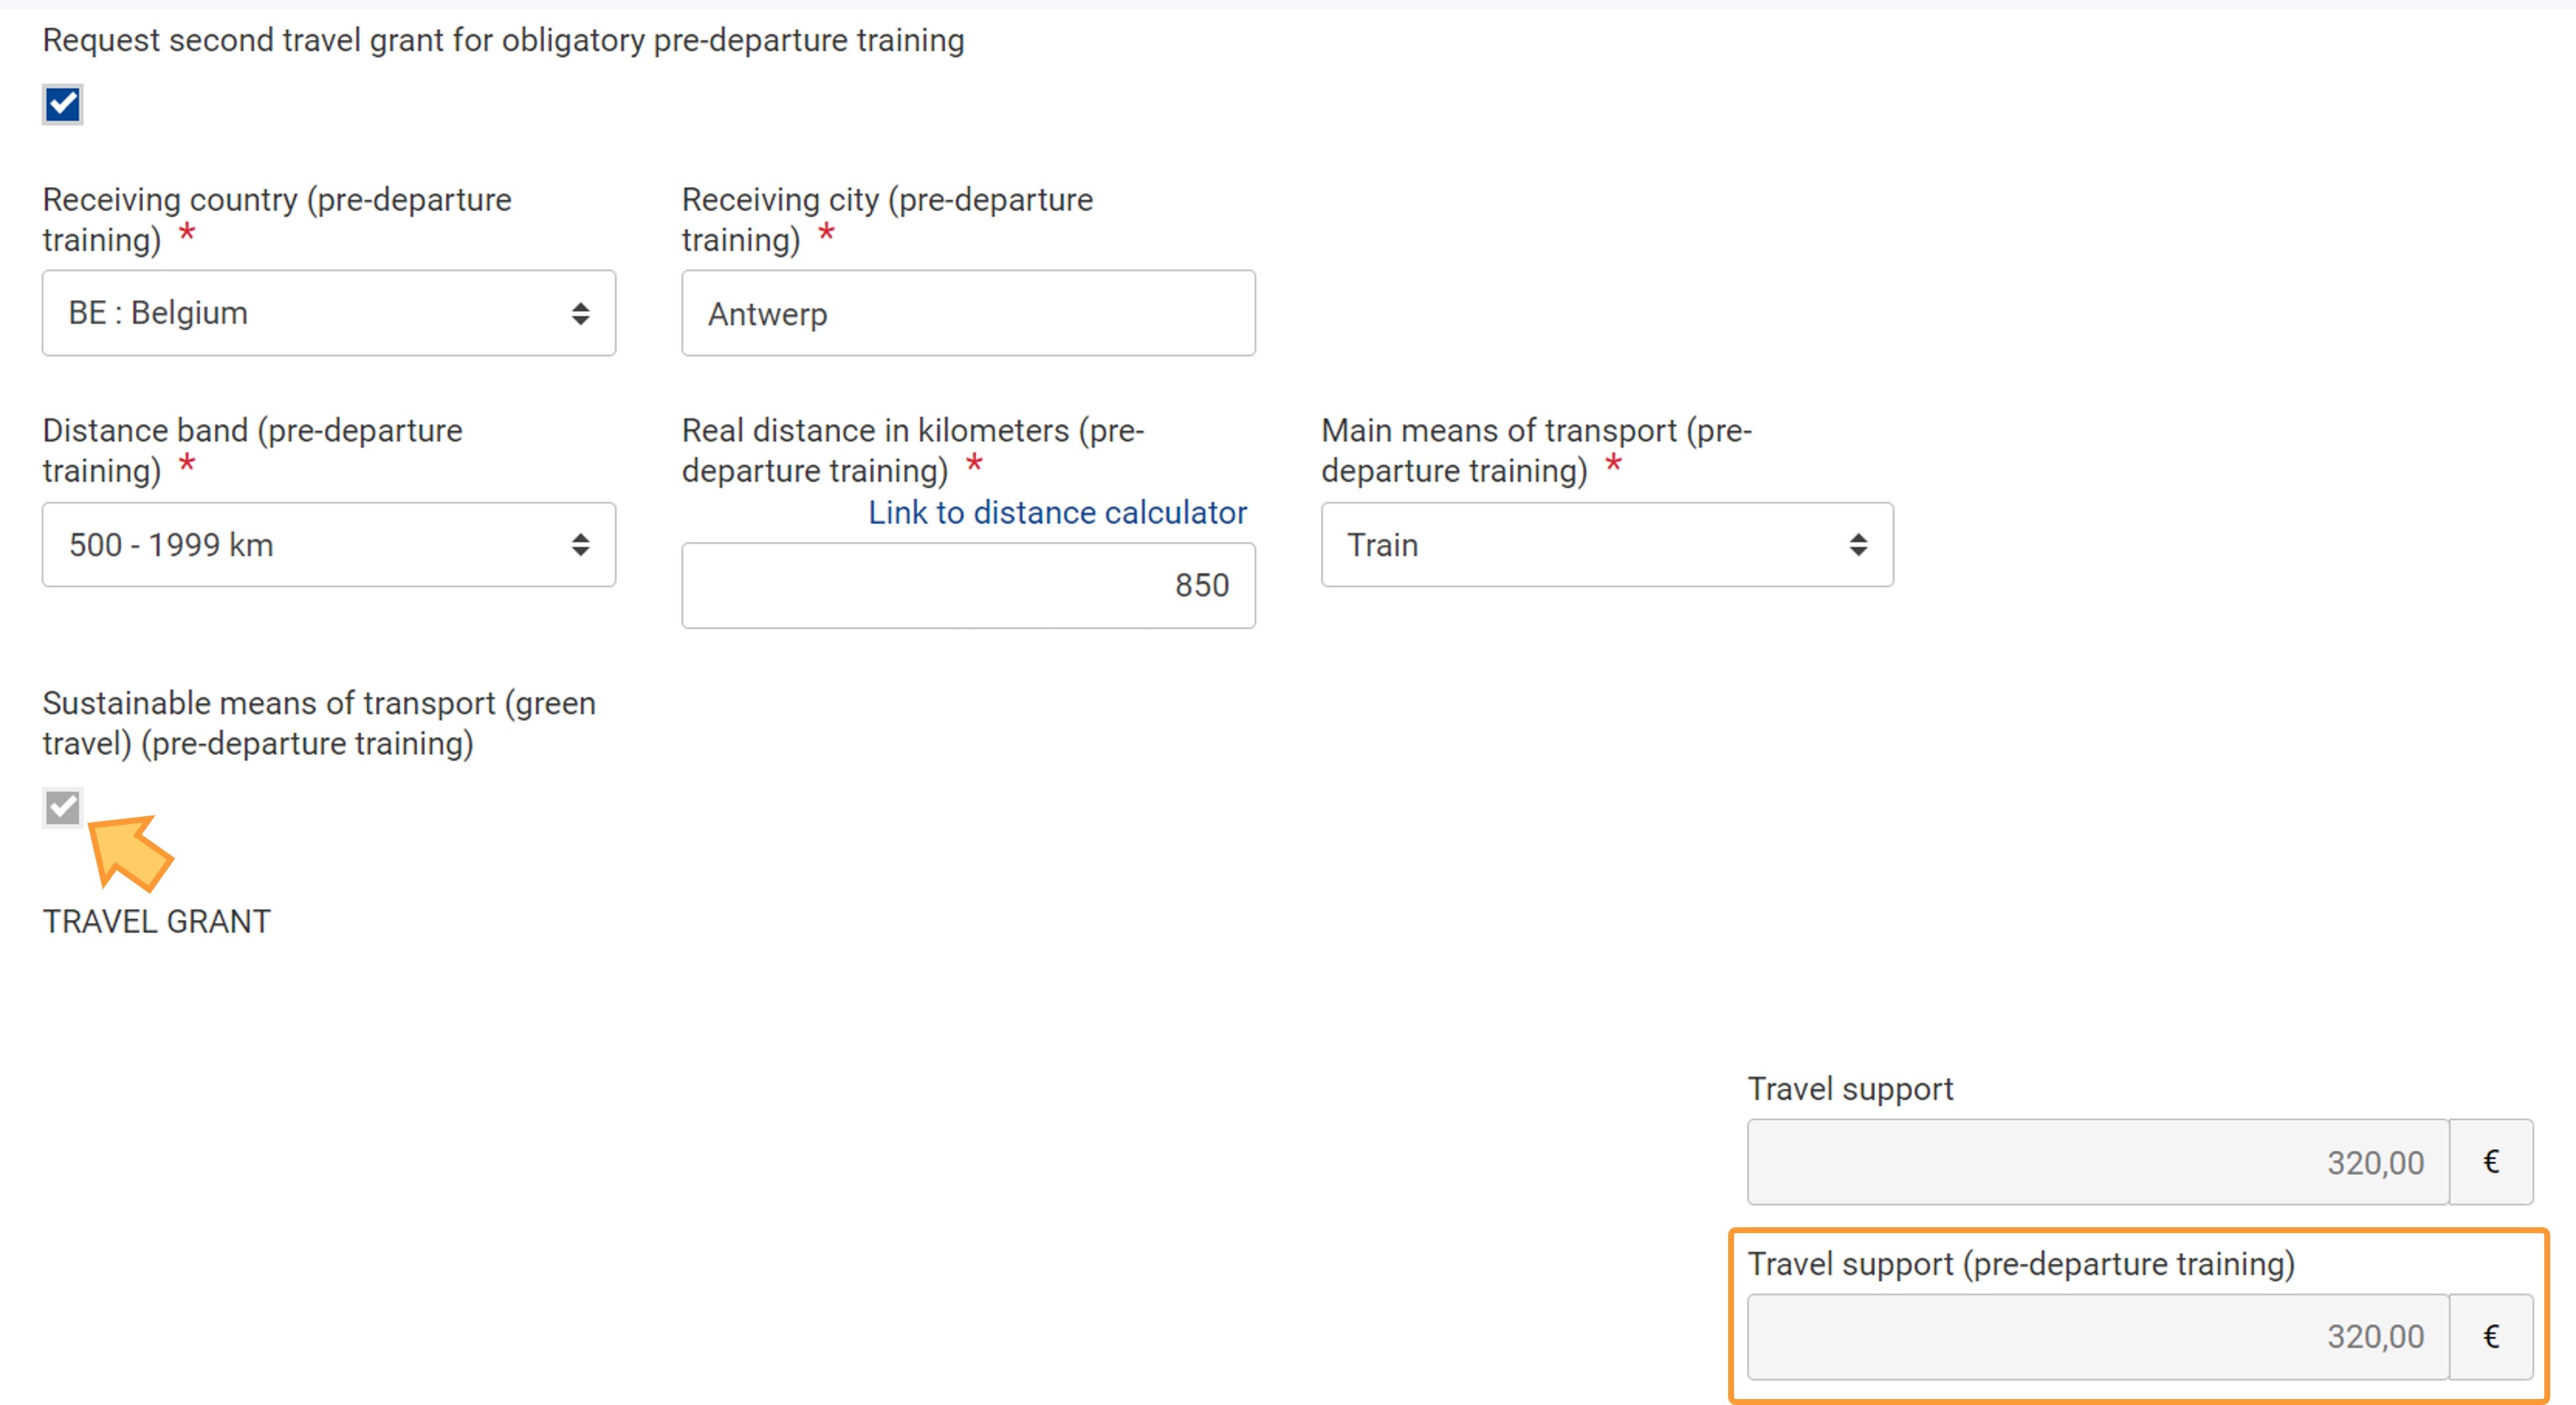 Travel support (pre-departure training) calculated automatically as per information provided